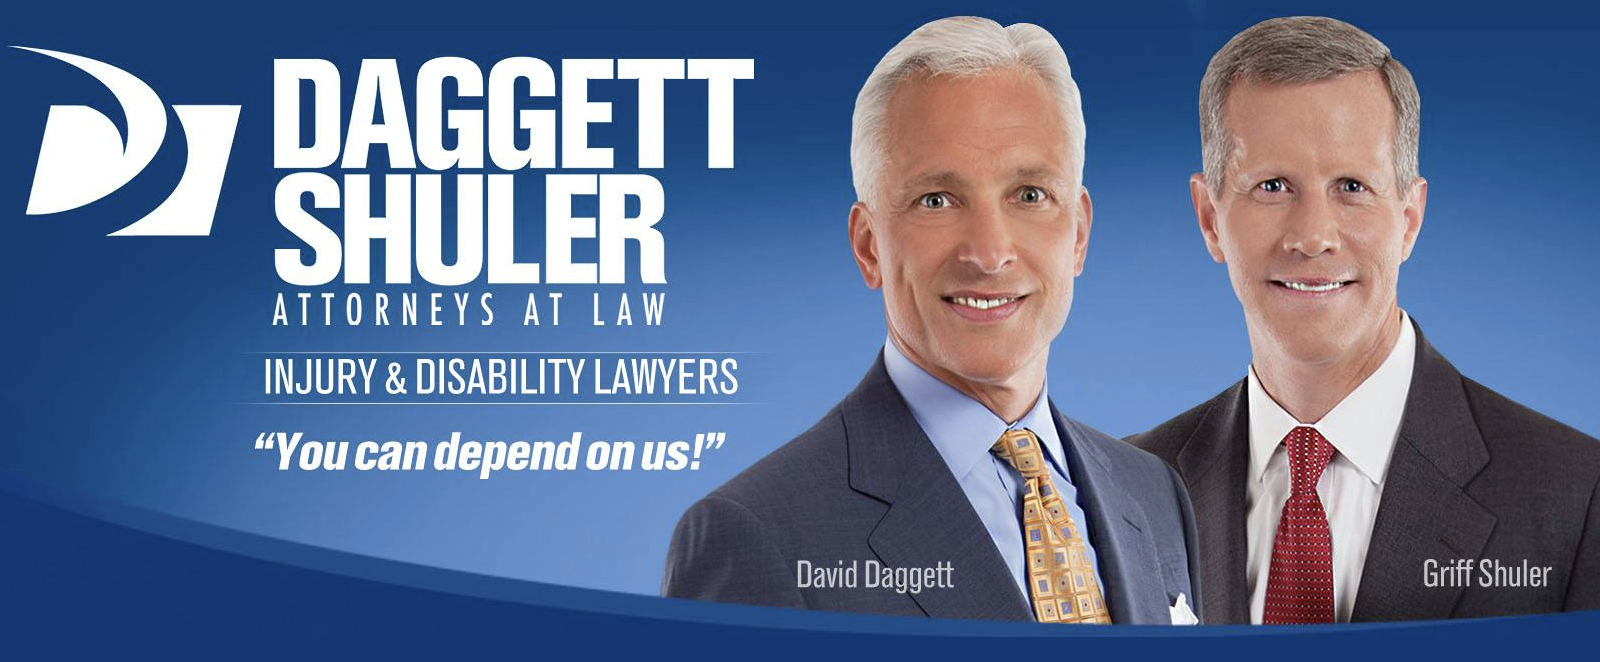 a banner for Daggett Shuler Attorneys At Law